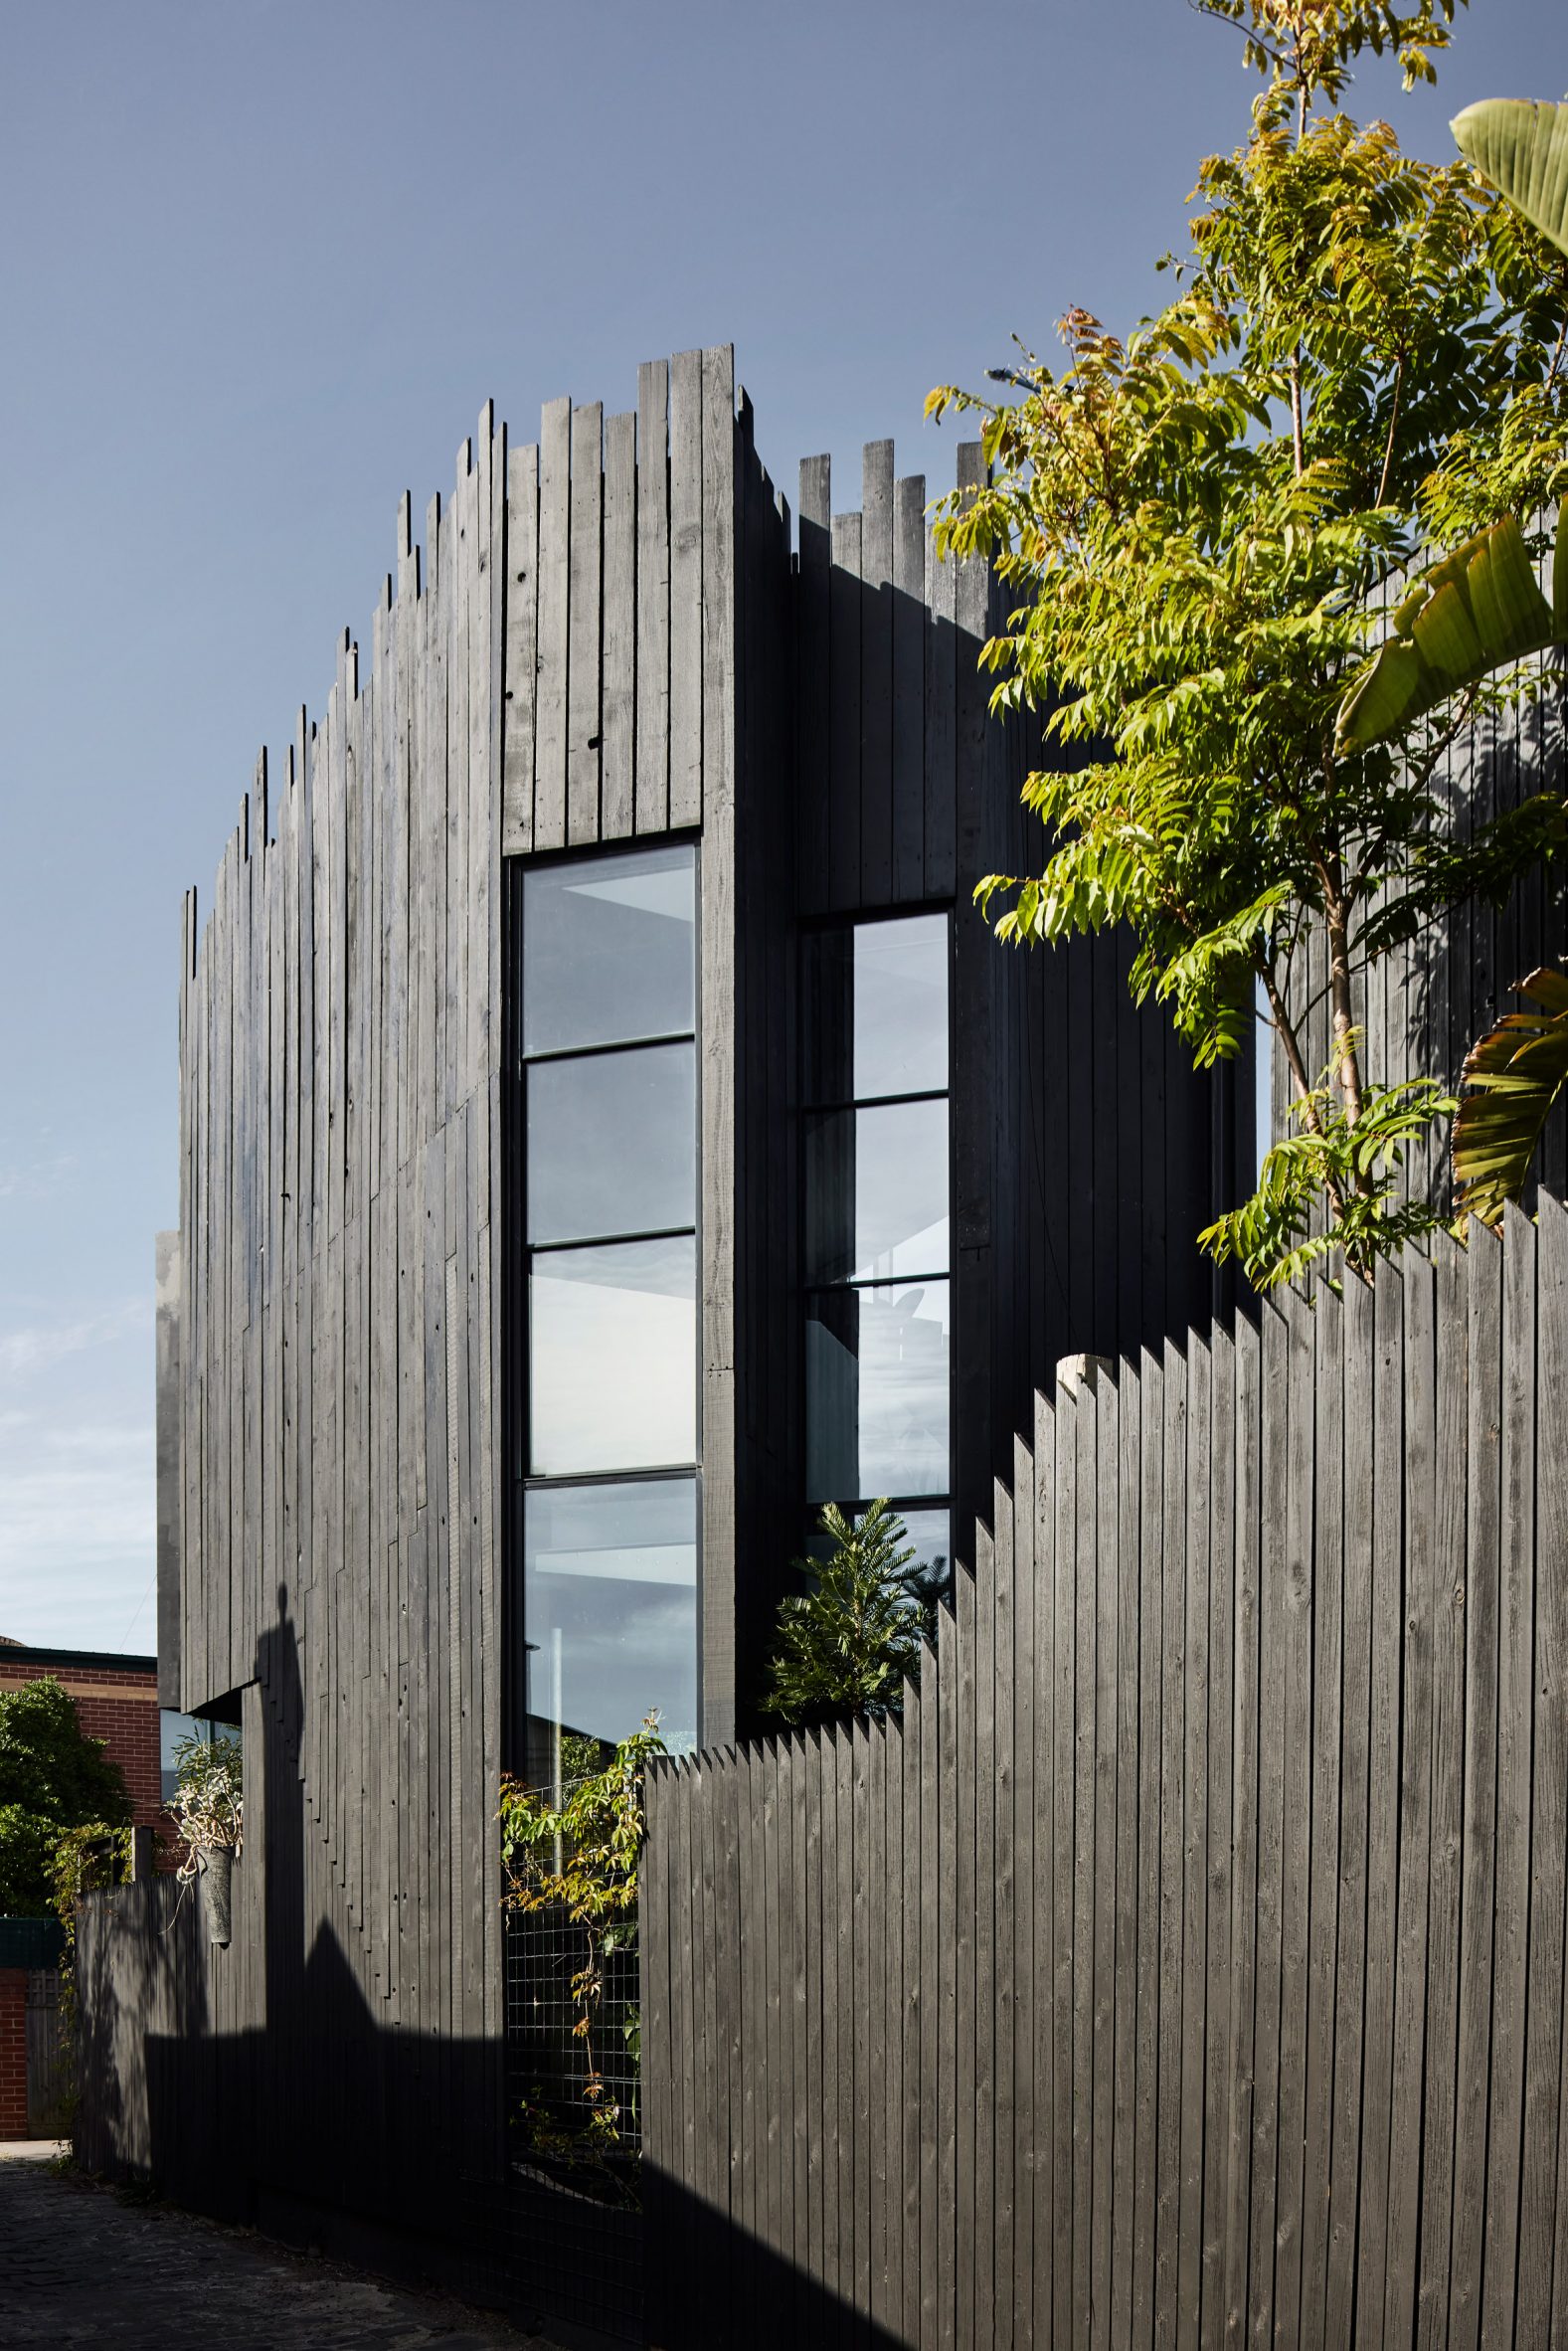 Rectangular windows punctuate the black timber facade at Host House